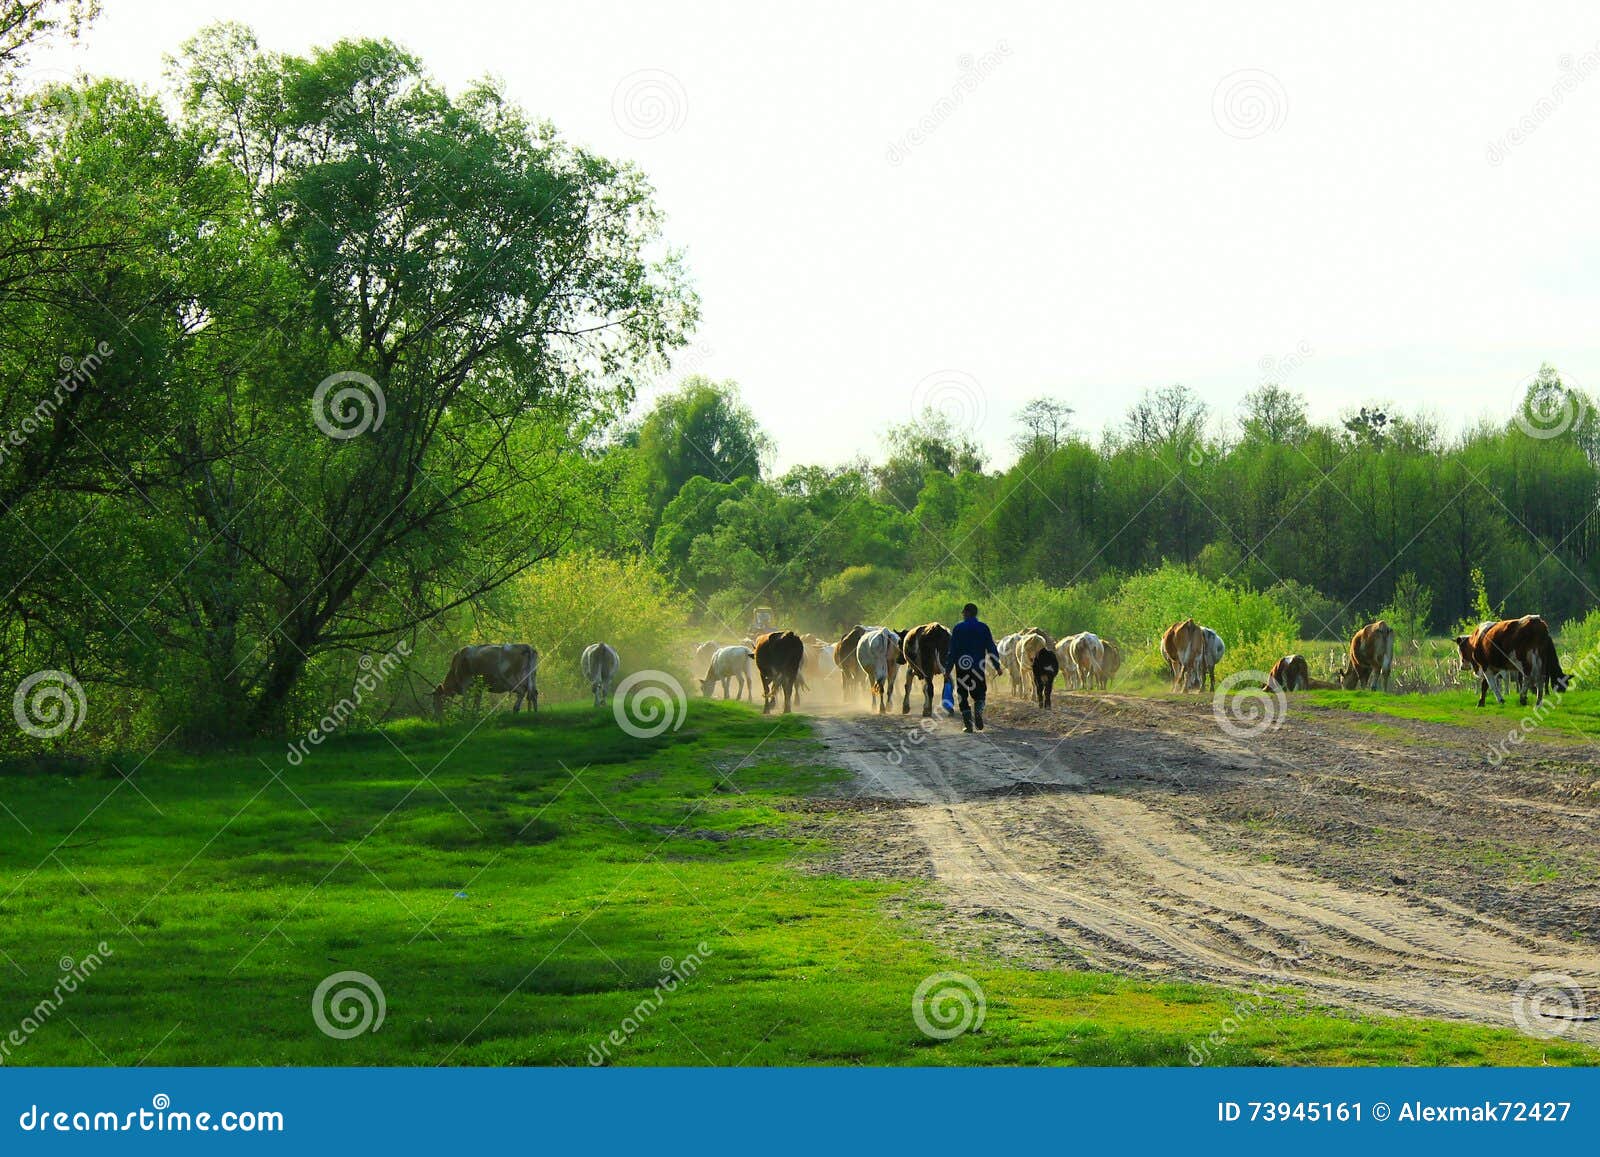 cows comes back from pasture with herder